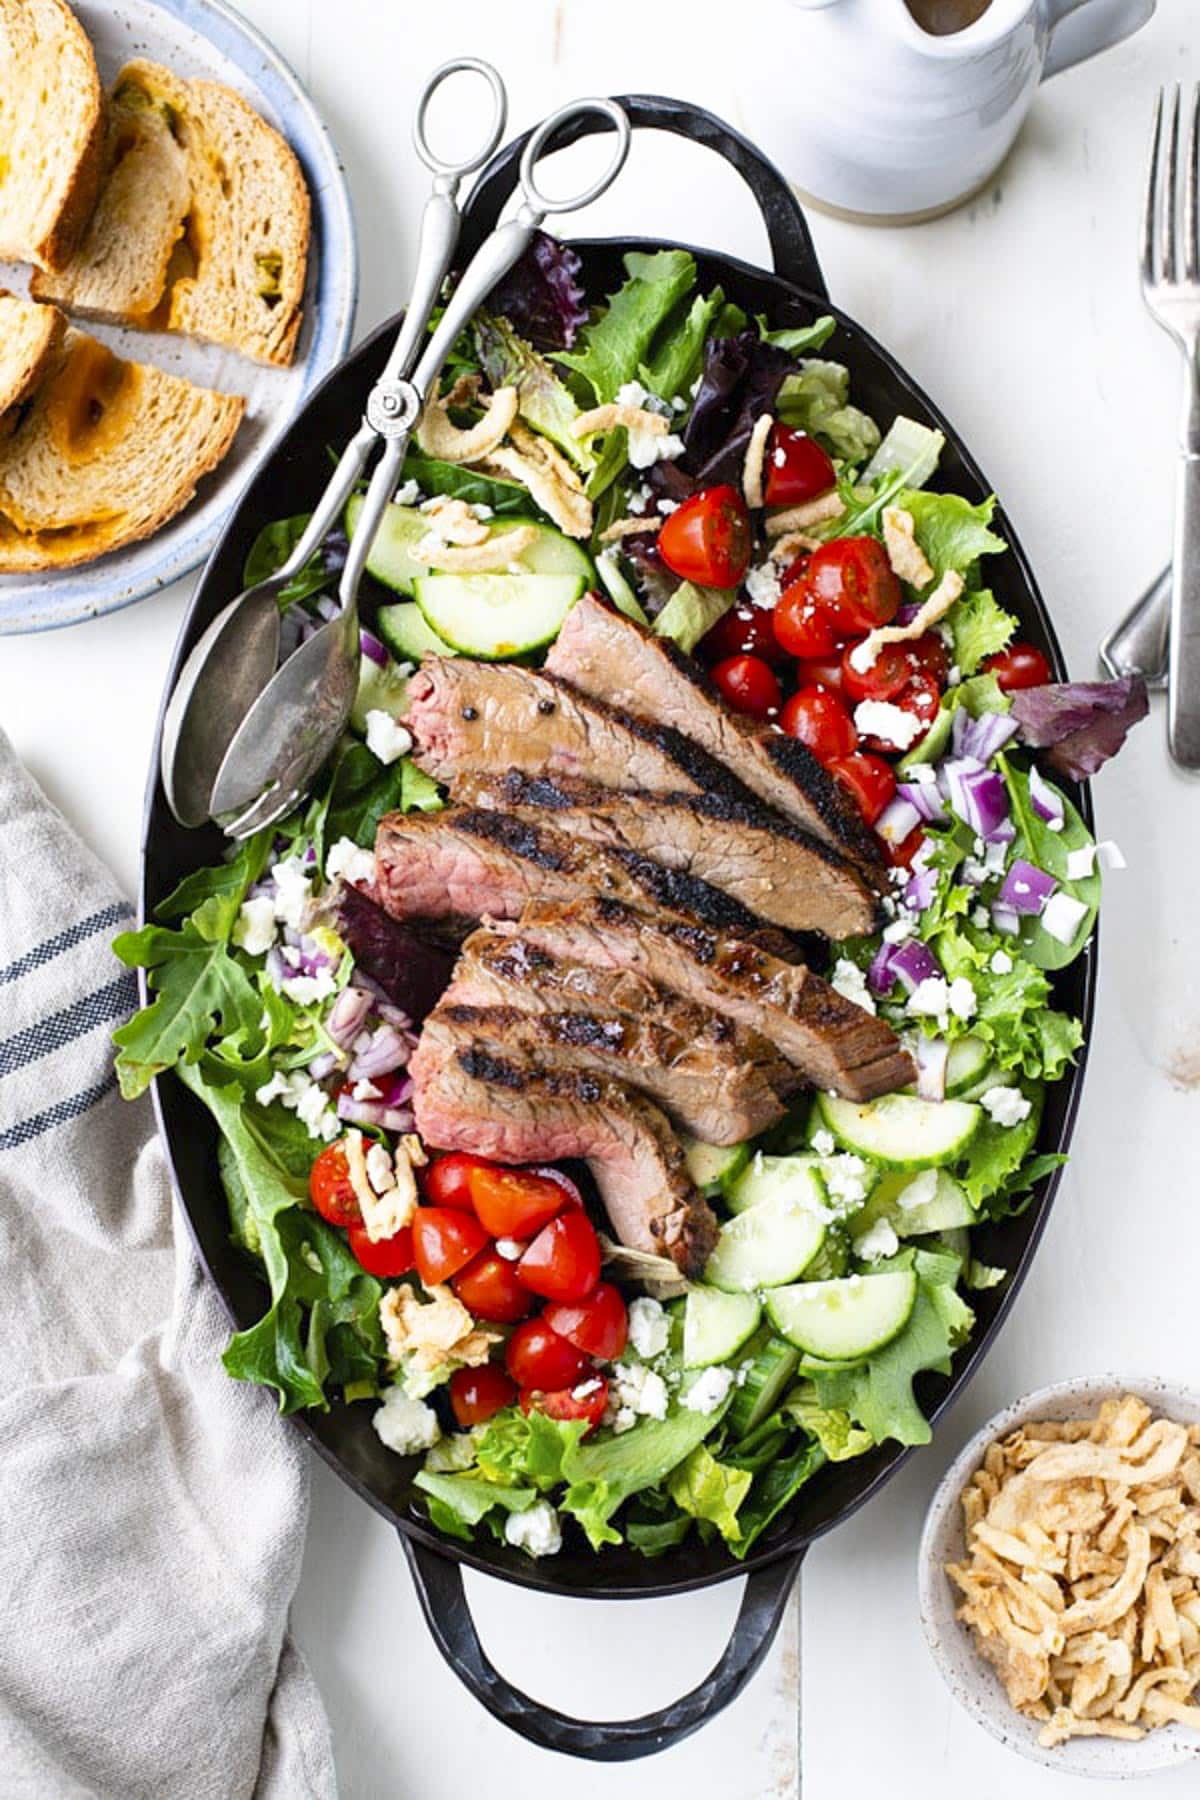 Overhead shot of steak salad on a white table with a side of homemade bread.